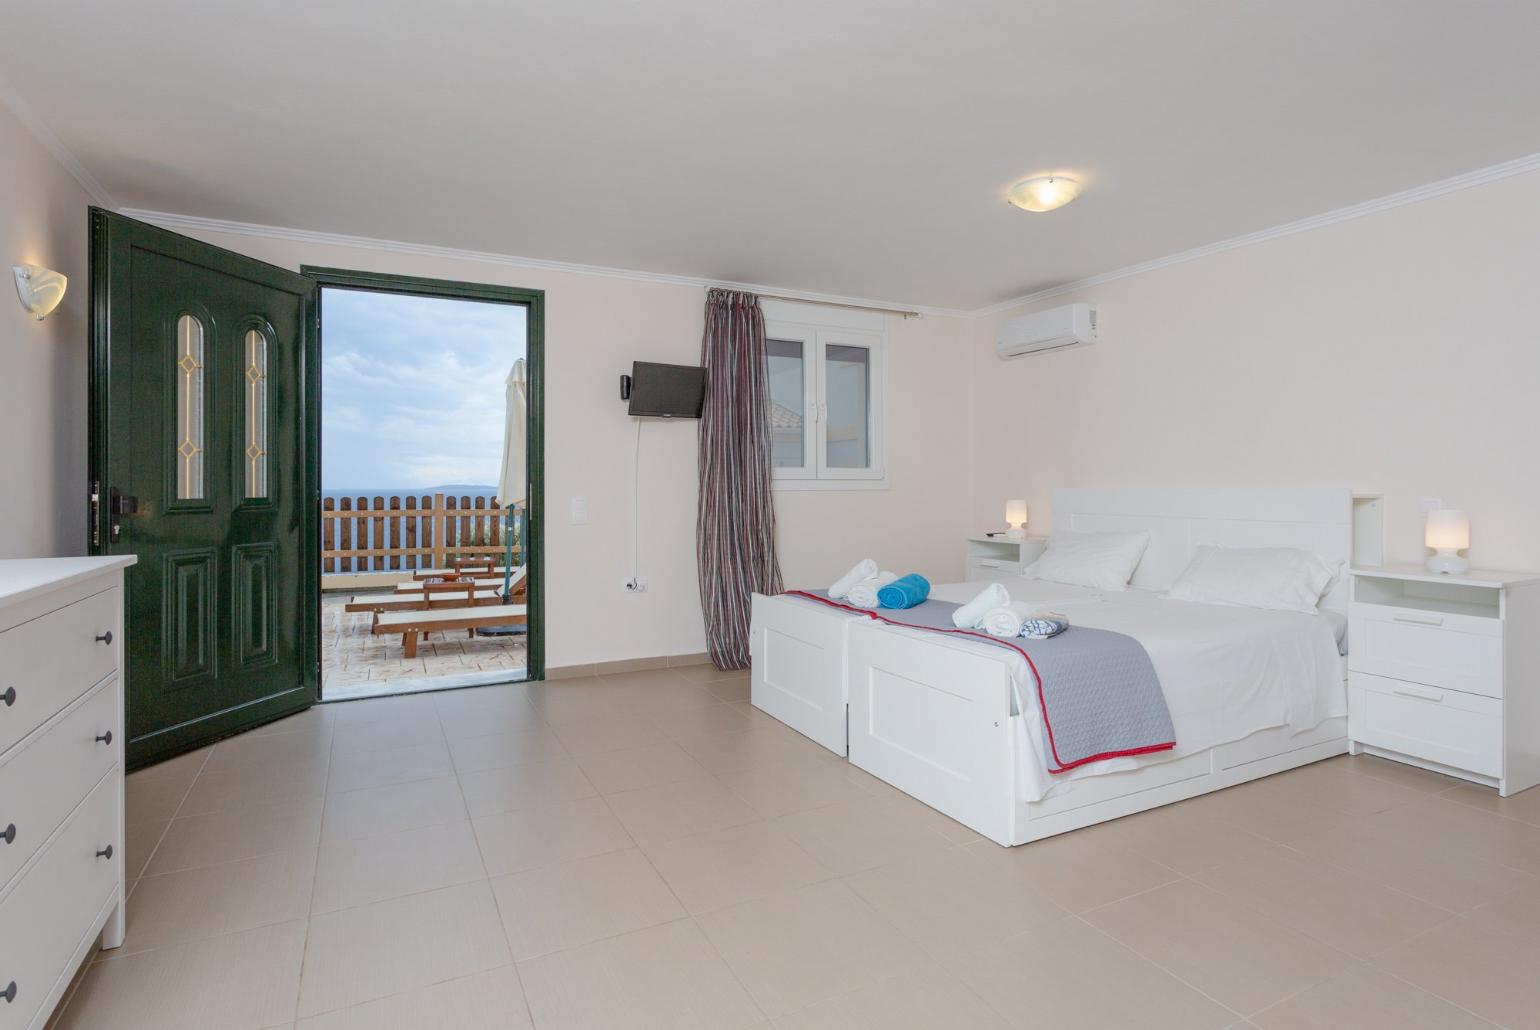 Twin bedroom with en suite bathroom, A/C, TV, and pool terrace access